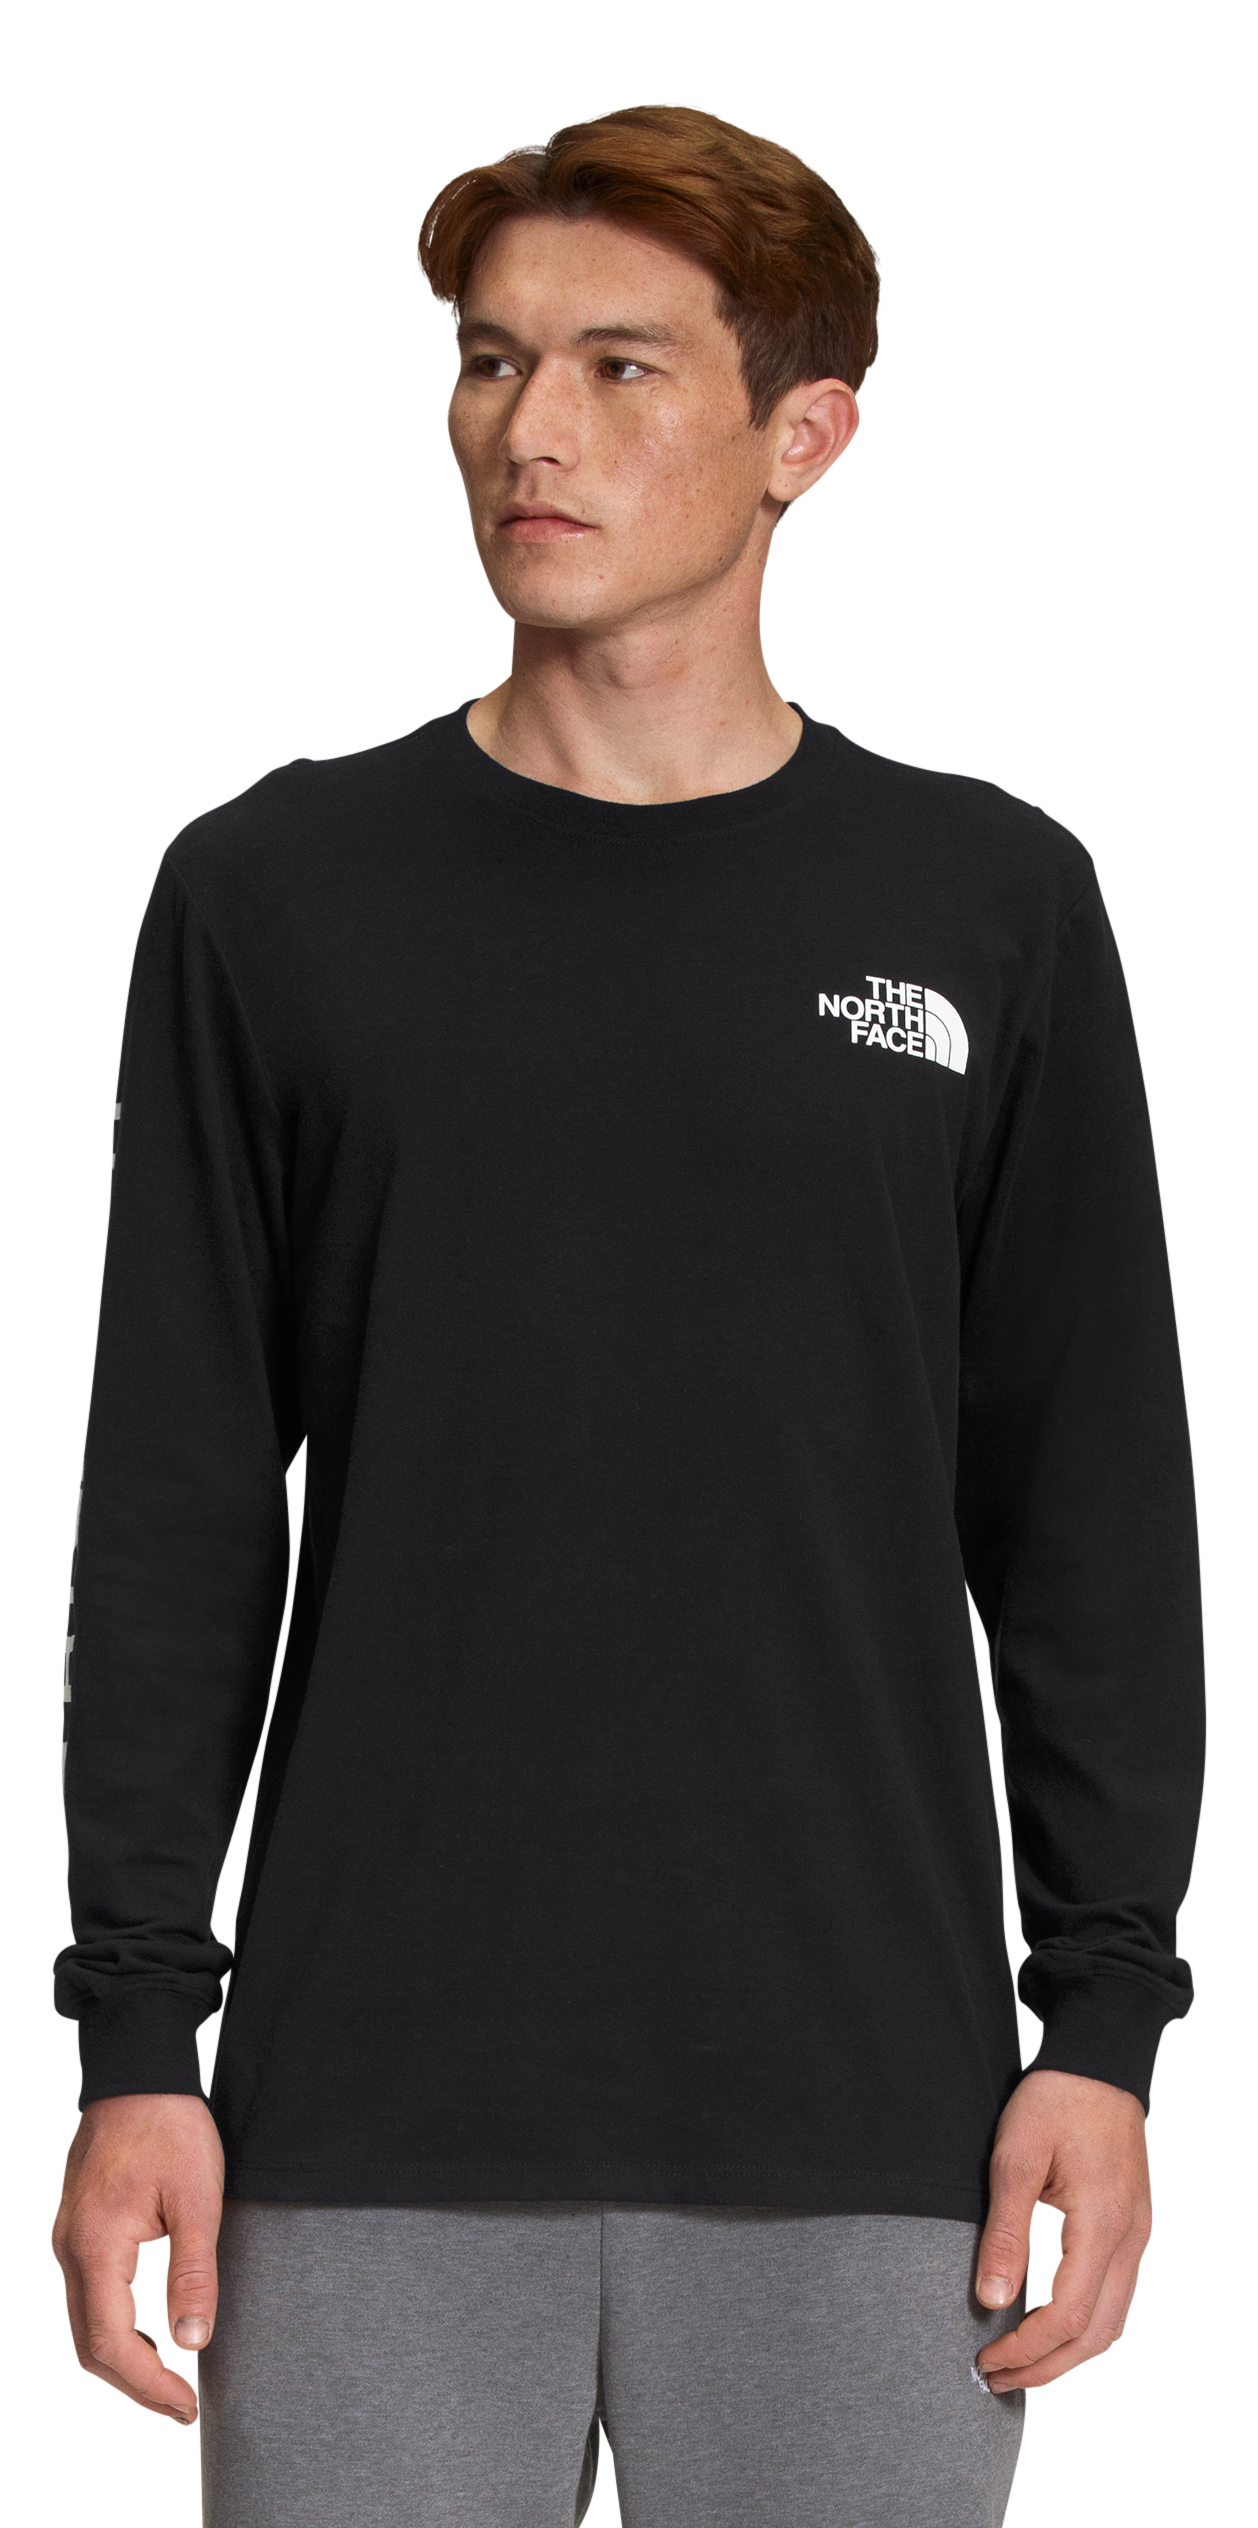 The North Face TNF Sleeve Hit Long-Sleeve T-Shirt for Men | Cabela's